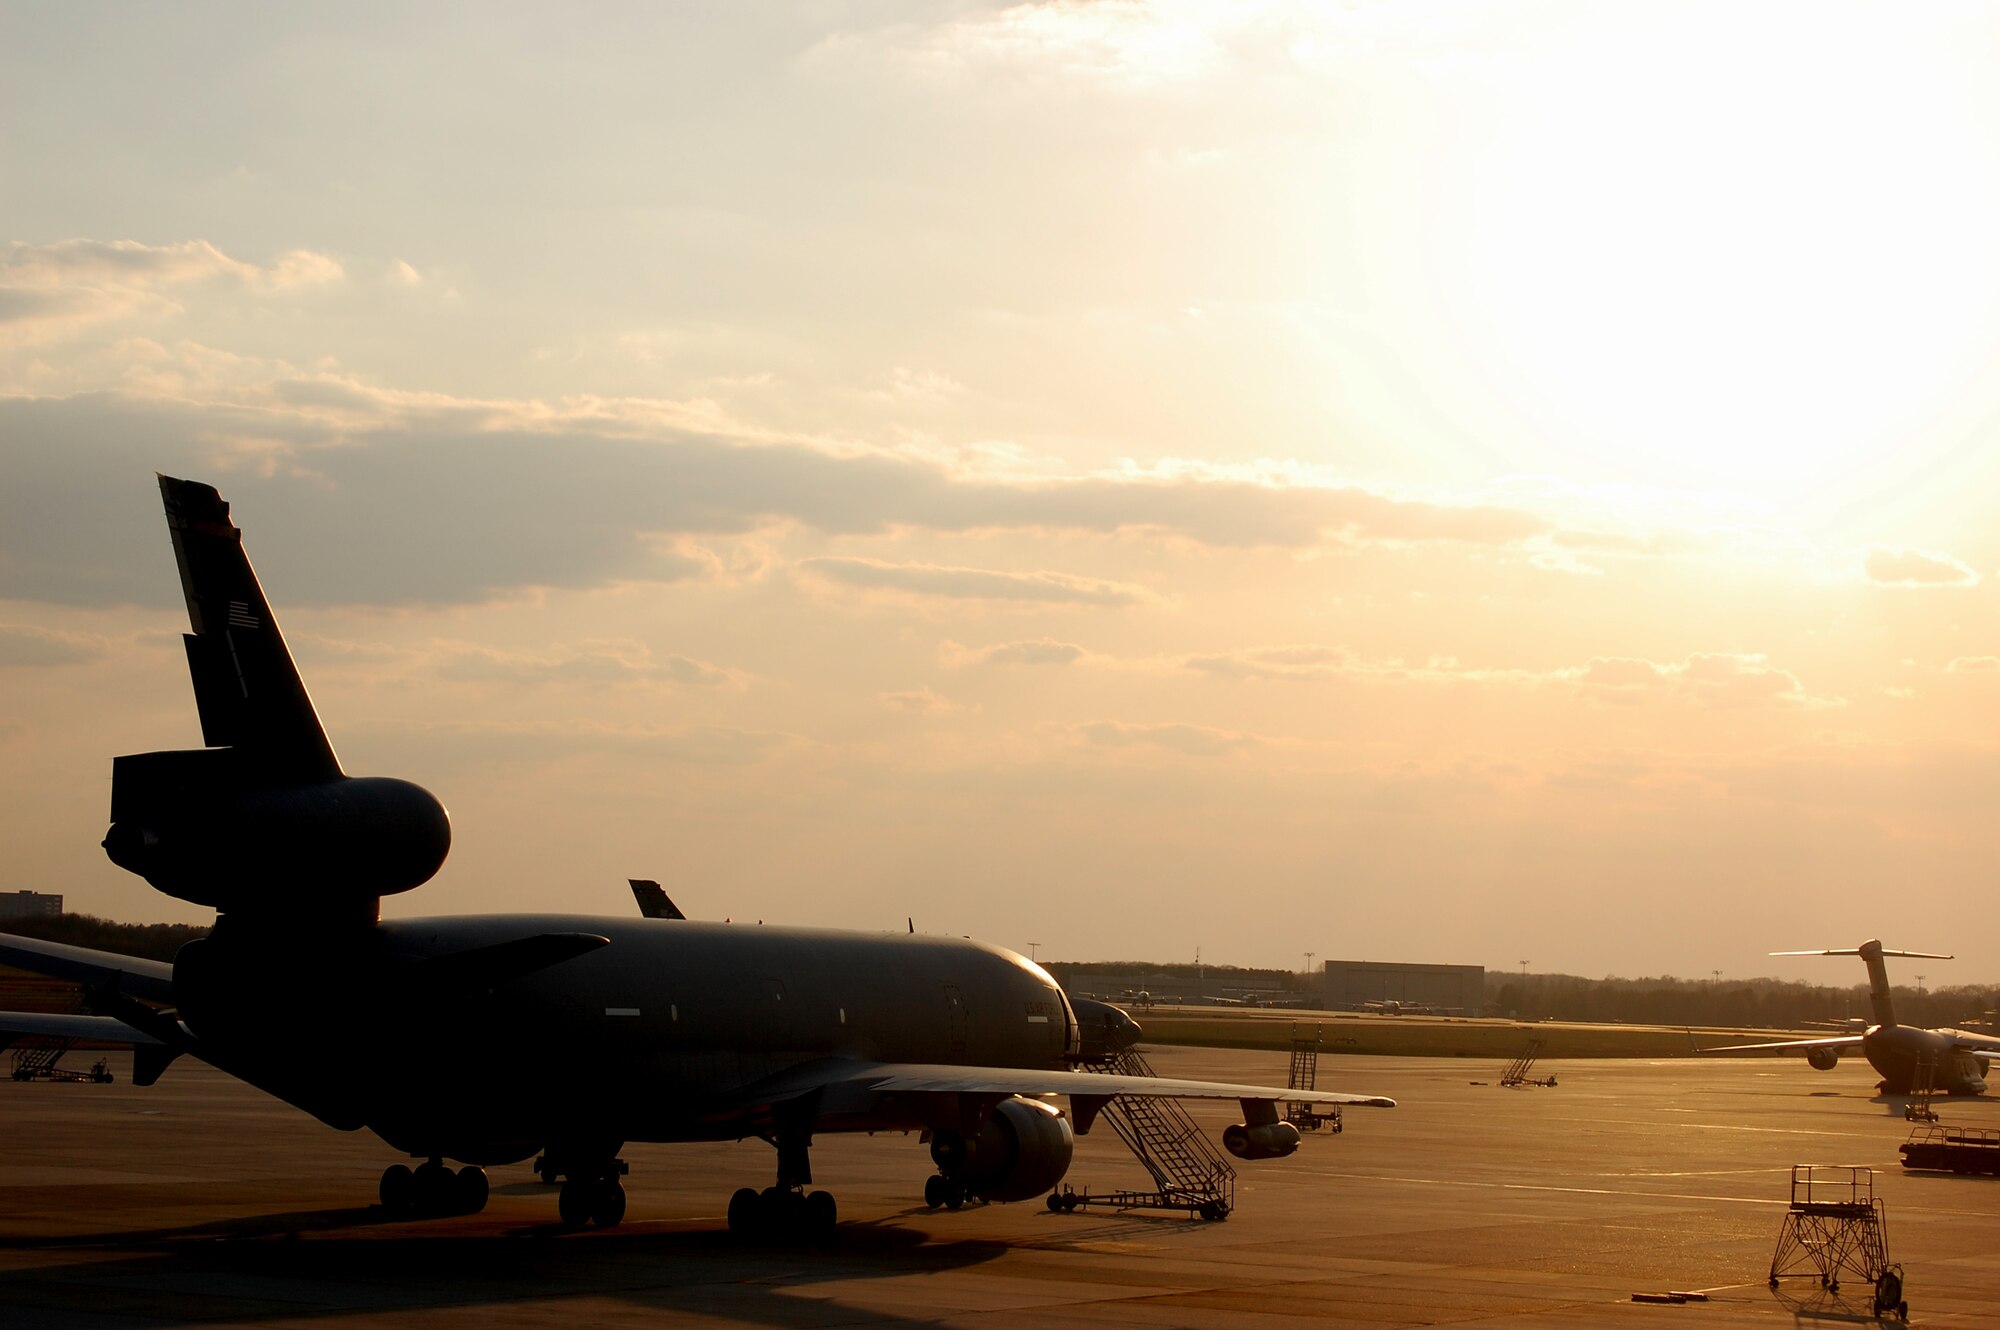 A KC-10 Extender is shadowed by the sun on the flightline at McGuire Air Force Base, N.J., on April 9, 2009.  The KC-10 Extender, an air refueling plane, is one of types of aircraft at McGuire that helps the Air Force and Air Mobility Command meet the service's global mission to "fly, fight and win...in air, space and cyberspace." (U.S. Air Force Photo/Tech. Sgt. Scott T. Sturkol)